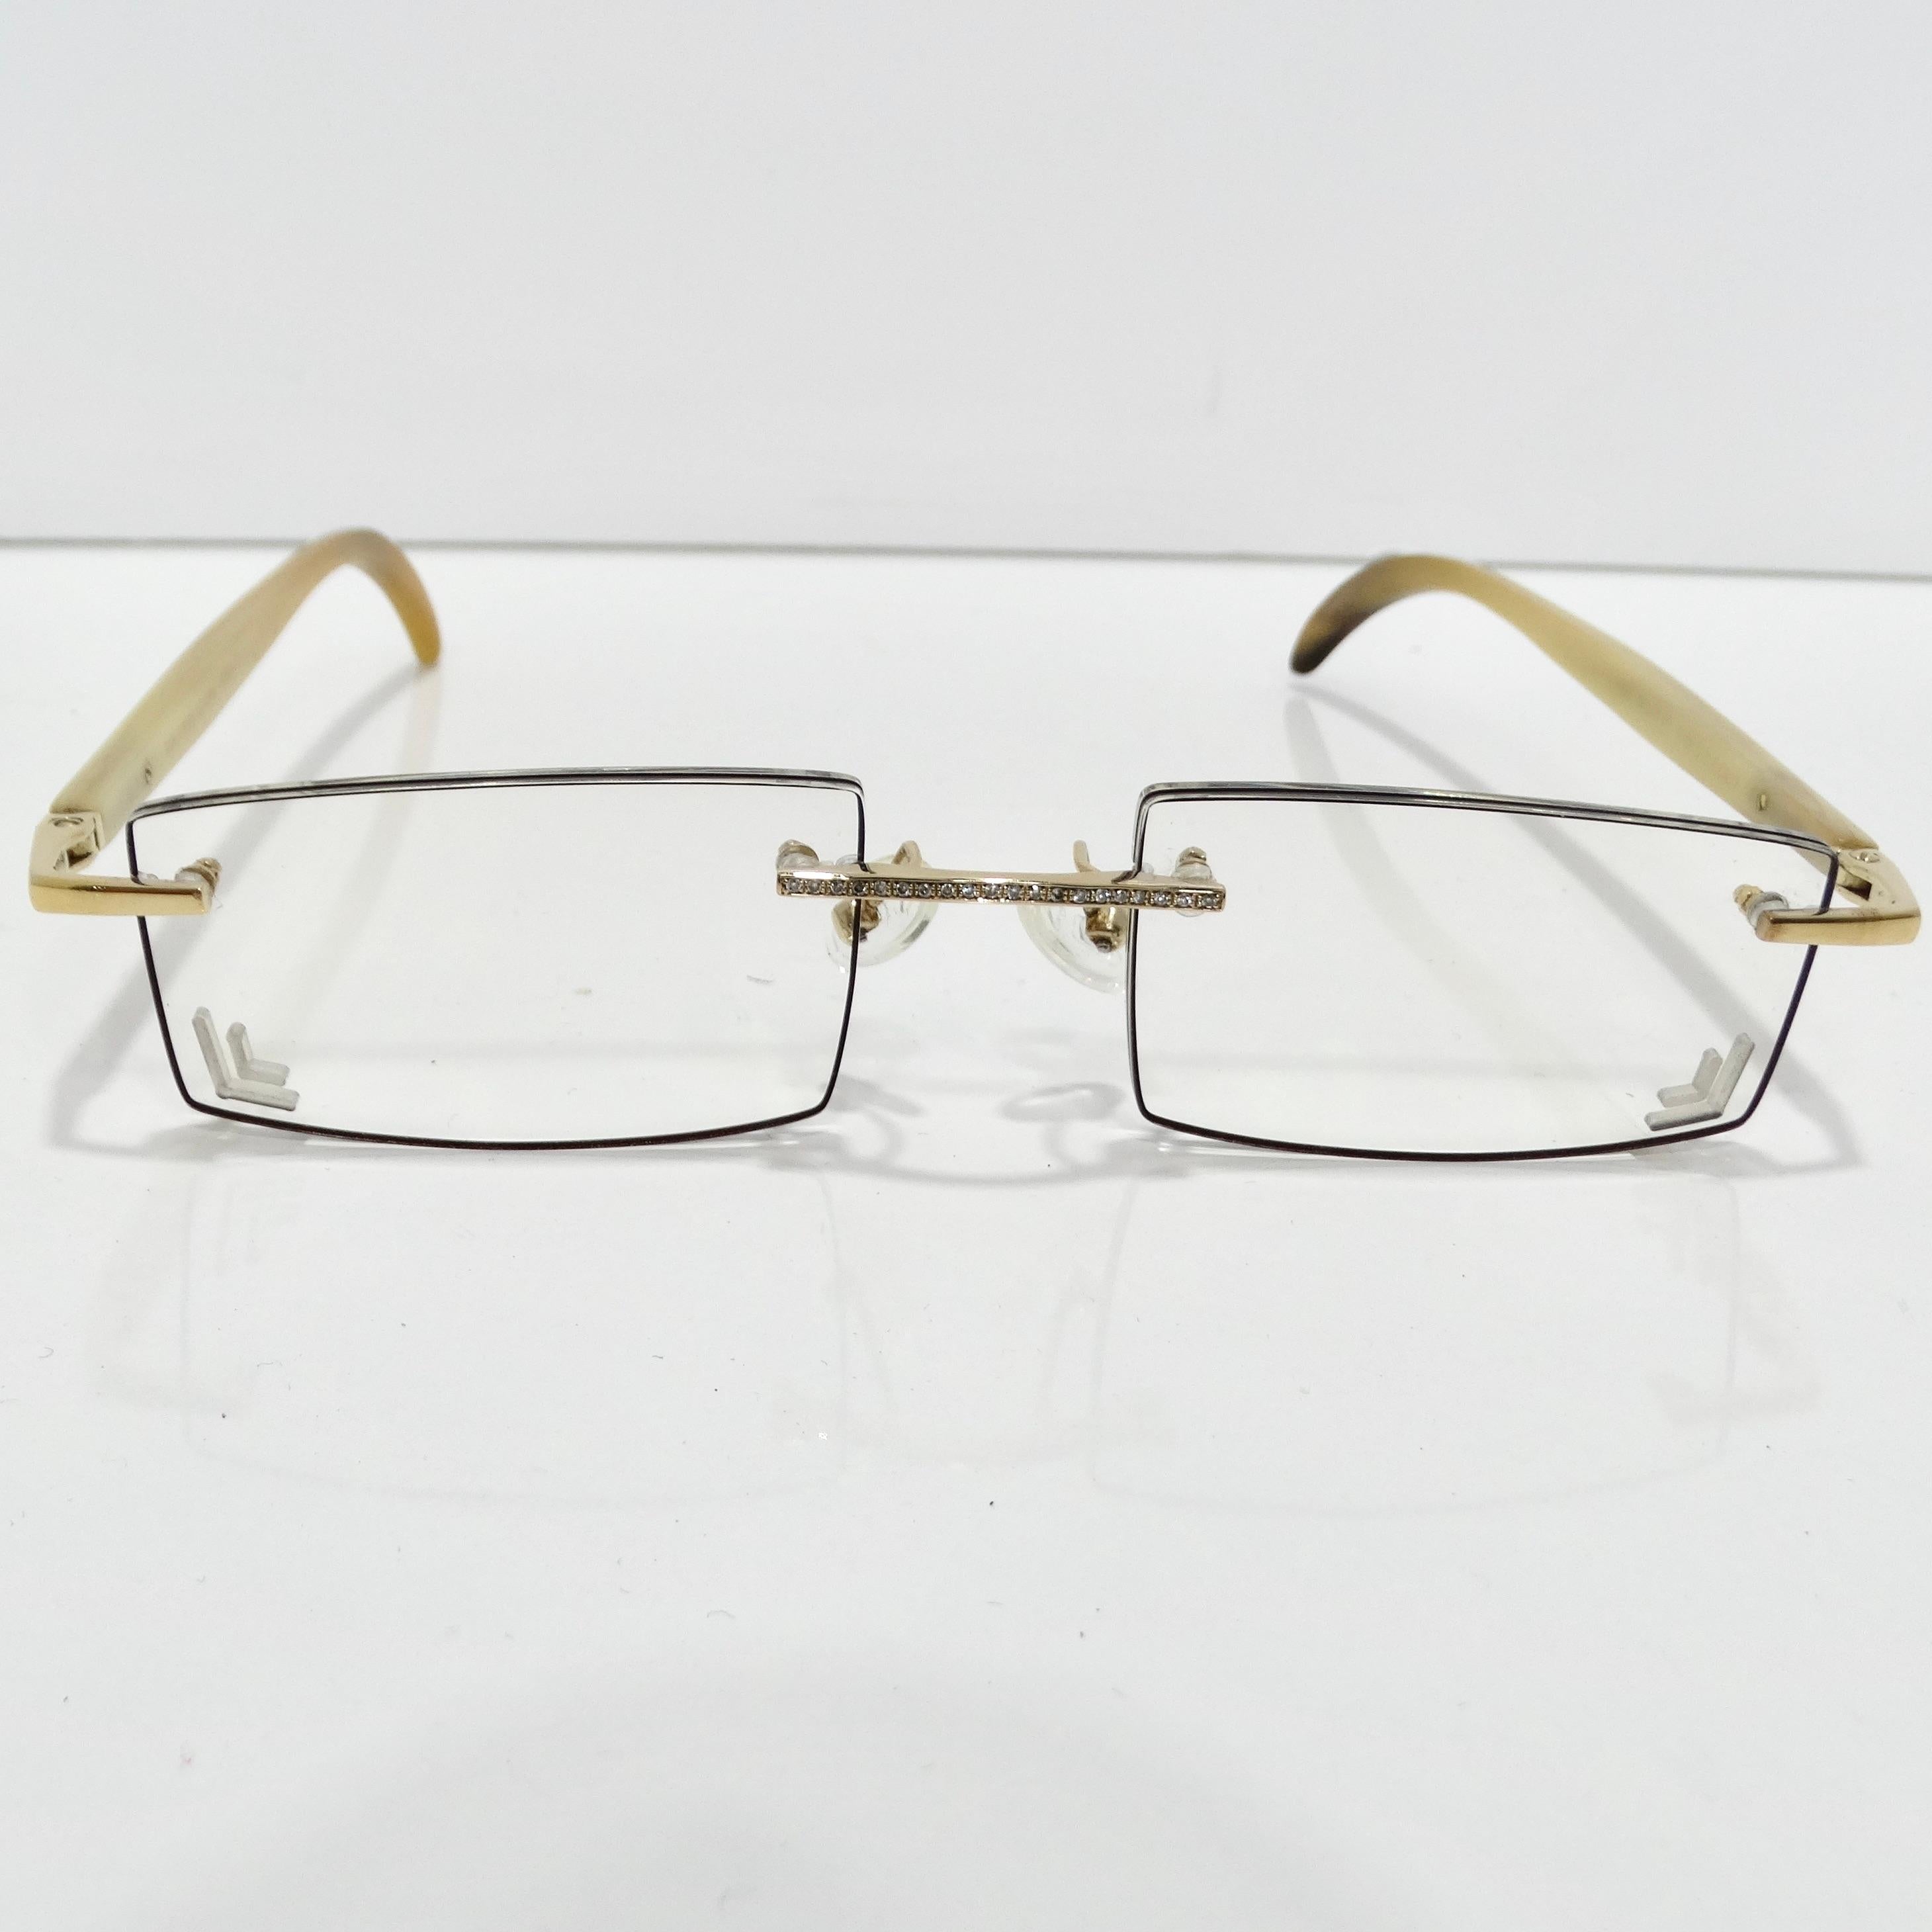 Gold & Wood Windsor 11 Diamond Eyeglasses In Excellent Condition For Sale In Scottsdale, AZ